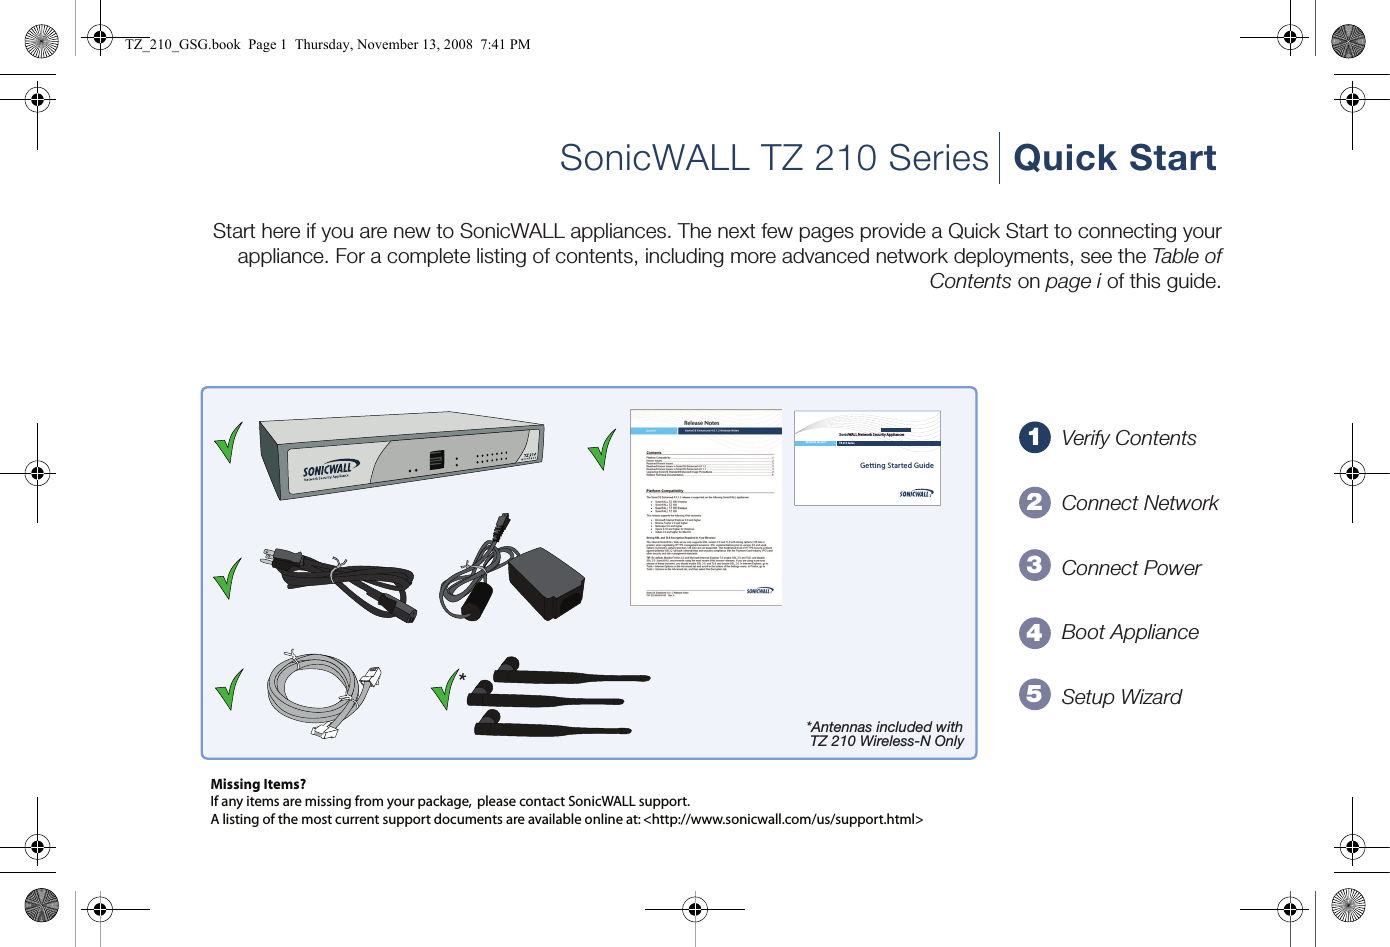 12345Getting Started GuideSonicWALL Network Security AppliancesNETWORK SECURITY TZ 210 SeriesMissing Items?If any items are missing from your package,  please contact SonicWALL support. A listing of the most current support documents are available online at: &lt;http://www.sonicwall.com/us/support.html&gt;*Antennas included with TZ 210 Wireless-N Only*SonicWALL TZ 210 Series Quick StartStart here if you are new to SonicWALL appliances. The next few pages provide a Quick Start to connecting your appliance. For a complete listing of contents, including more advanced network deployments, see the Table of Contents on page i of this guide.Verify ContentsConnect NetworkConnect PowerBoot ApplianceSetup WizardTZ_210_GSG.book  Page 1  Thursday, November 13, 2008  7:41 PM